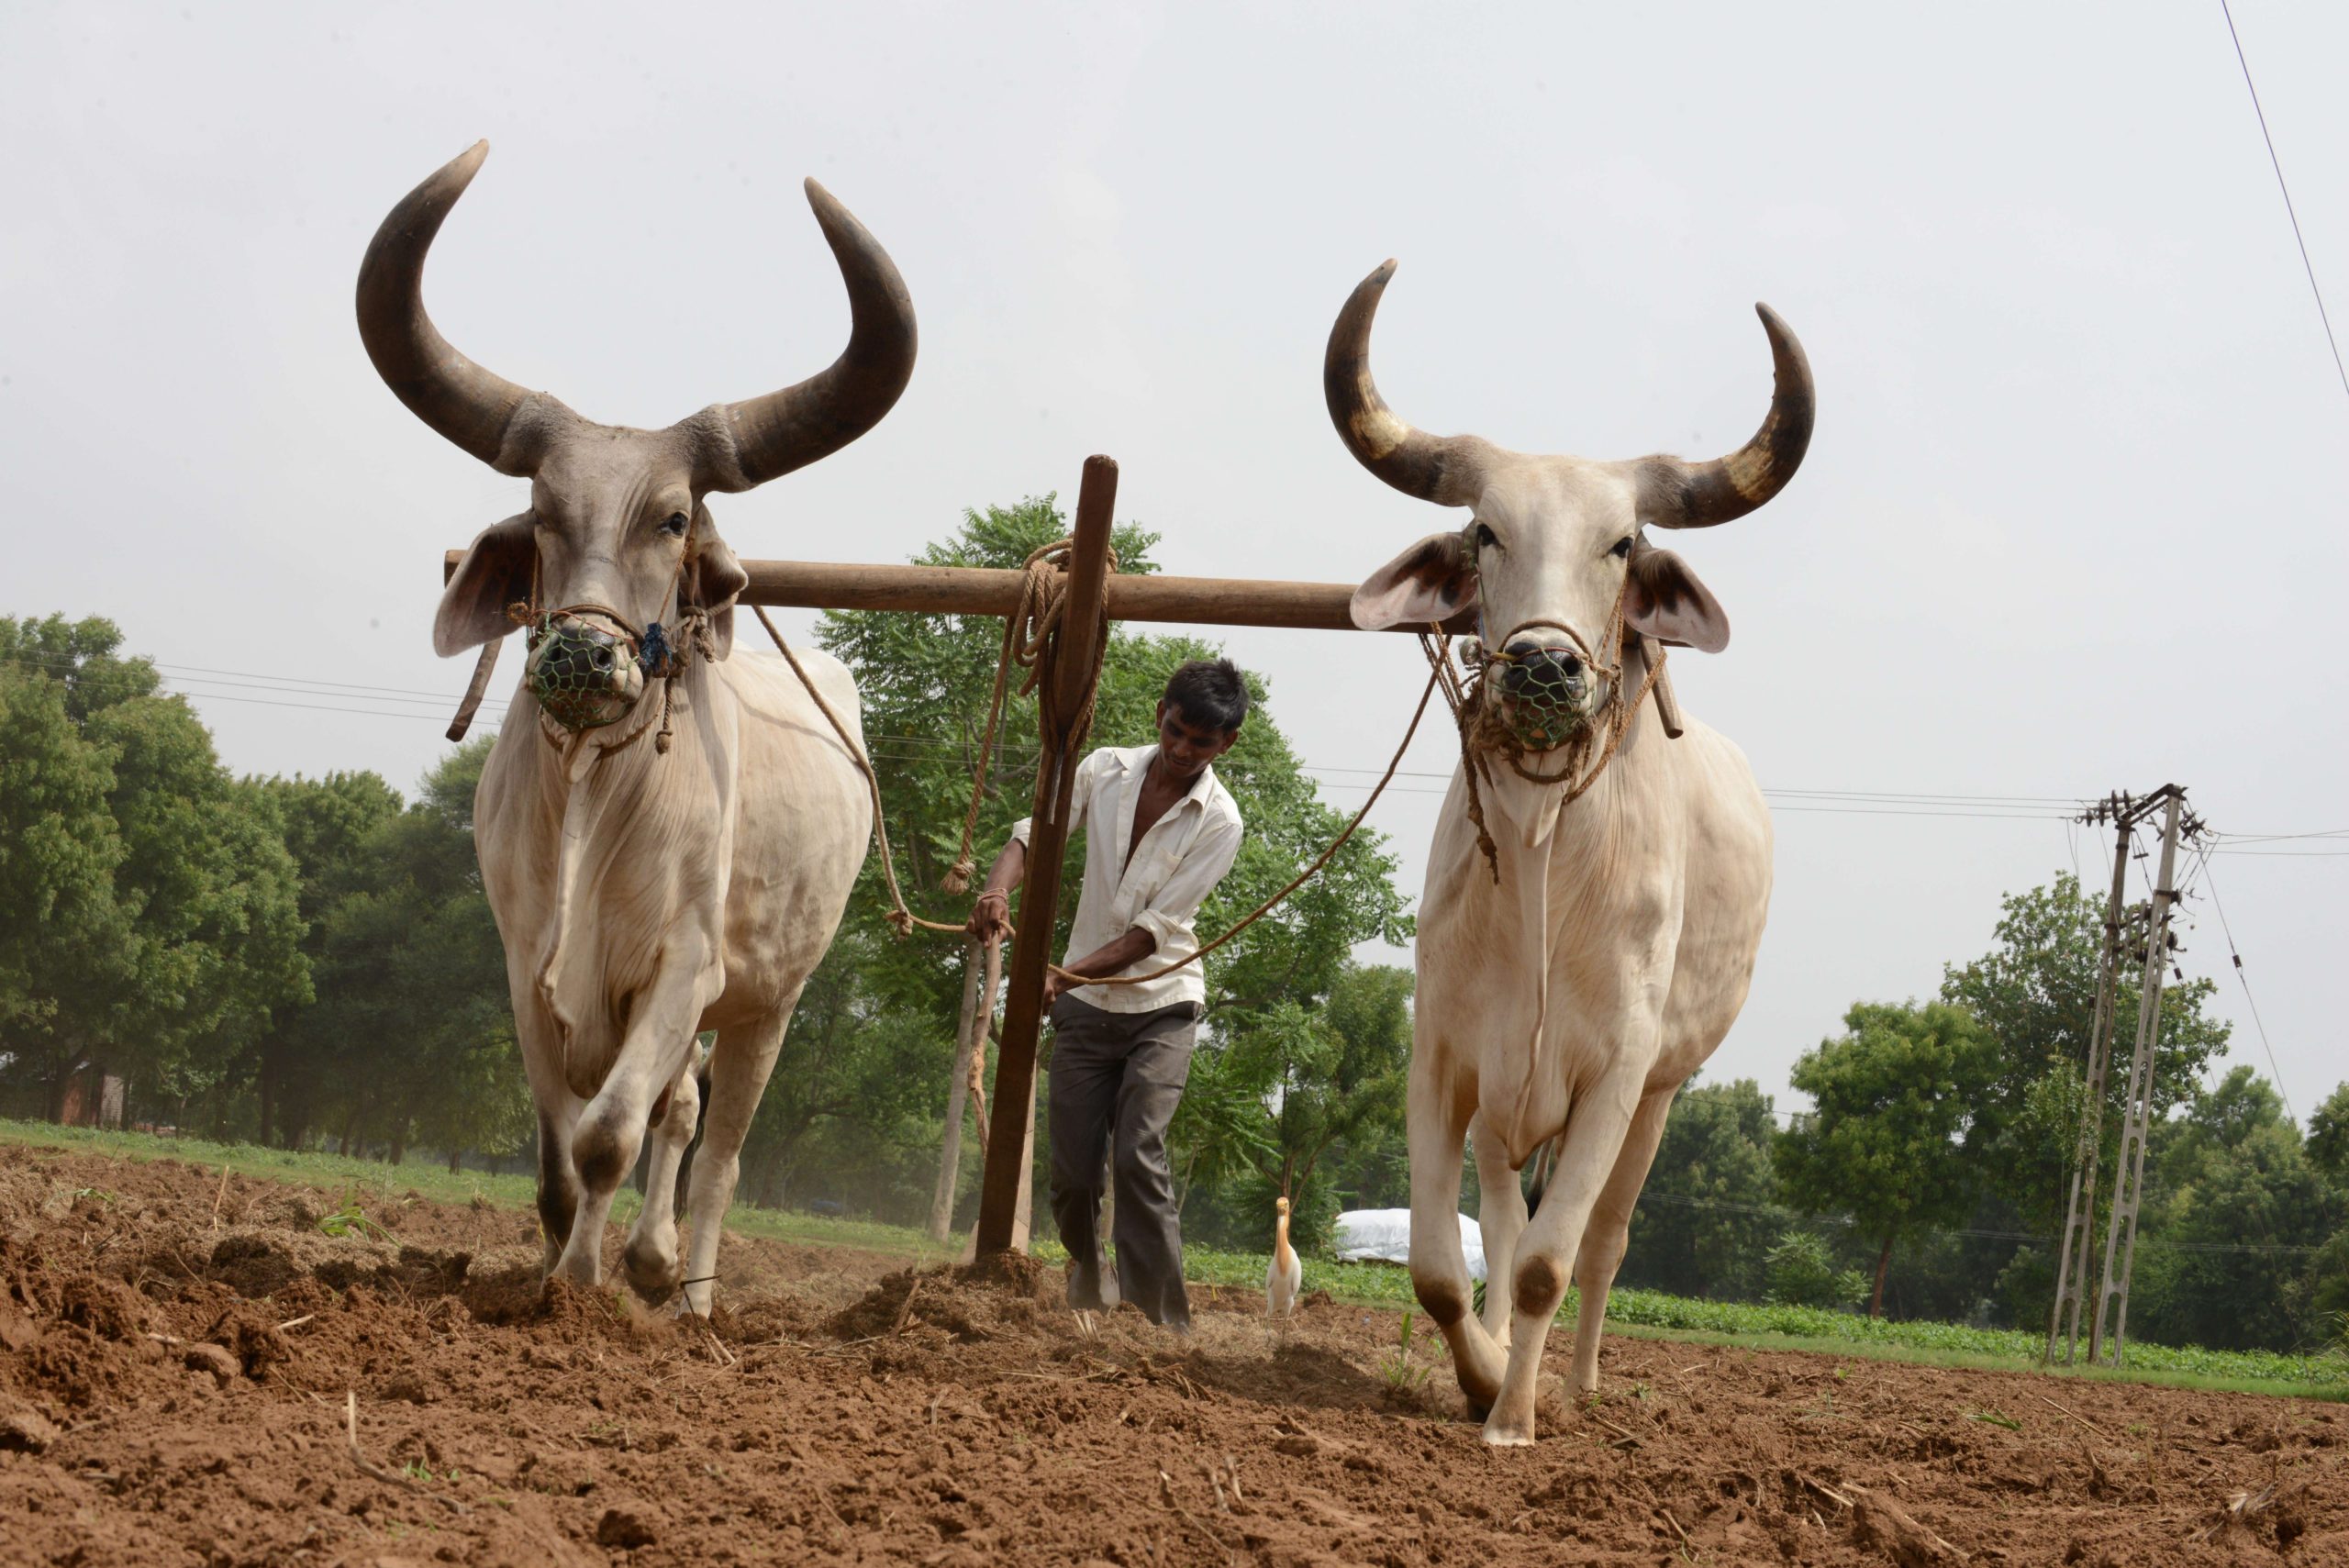 Two zebus, a modern aurochs relative, ploughing a field in Gujarat, India, in 2014. (Photo: SAM PANTHAKY/AFP via Getty Images, Getty Images)